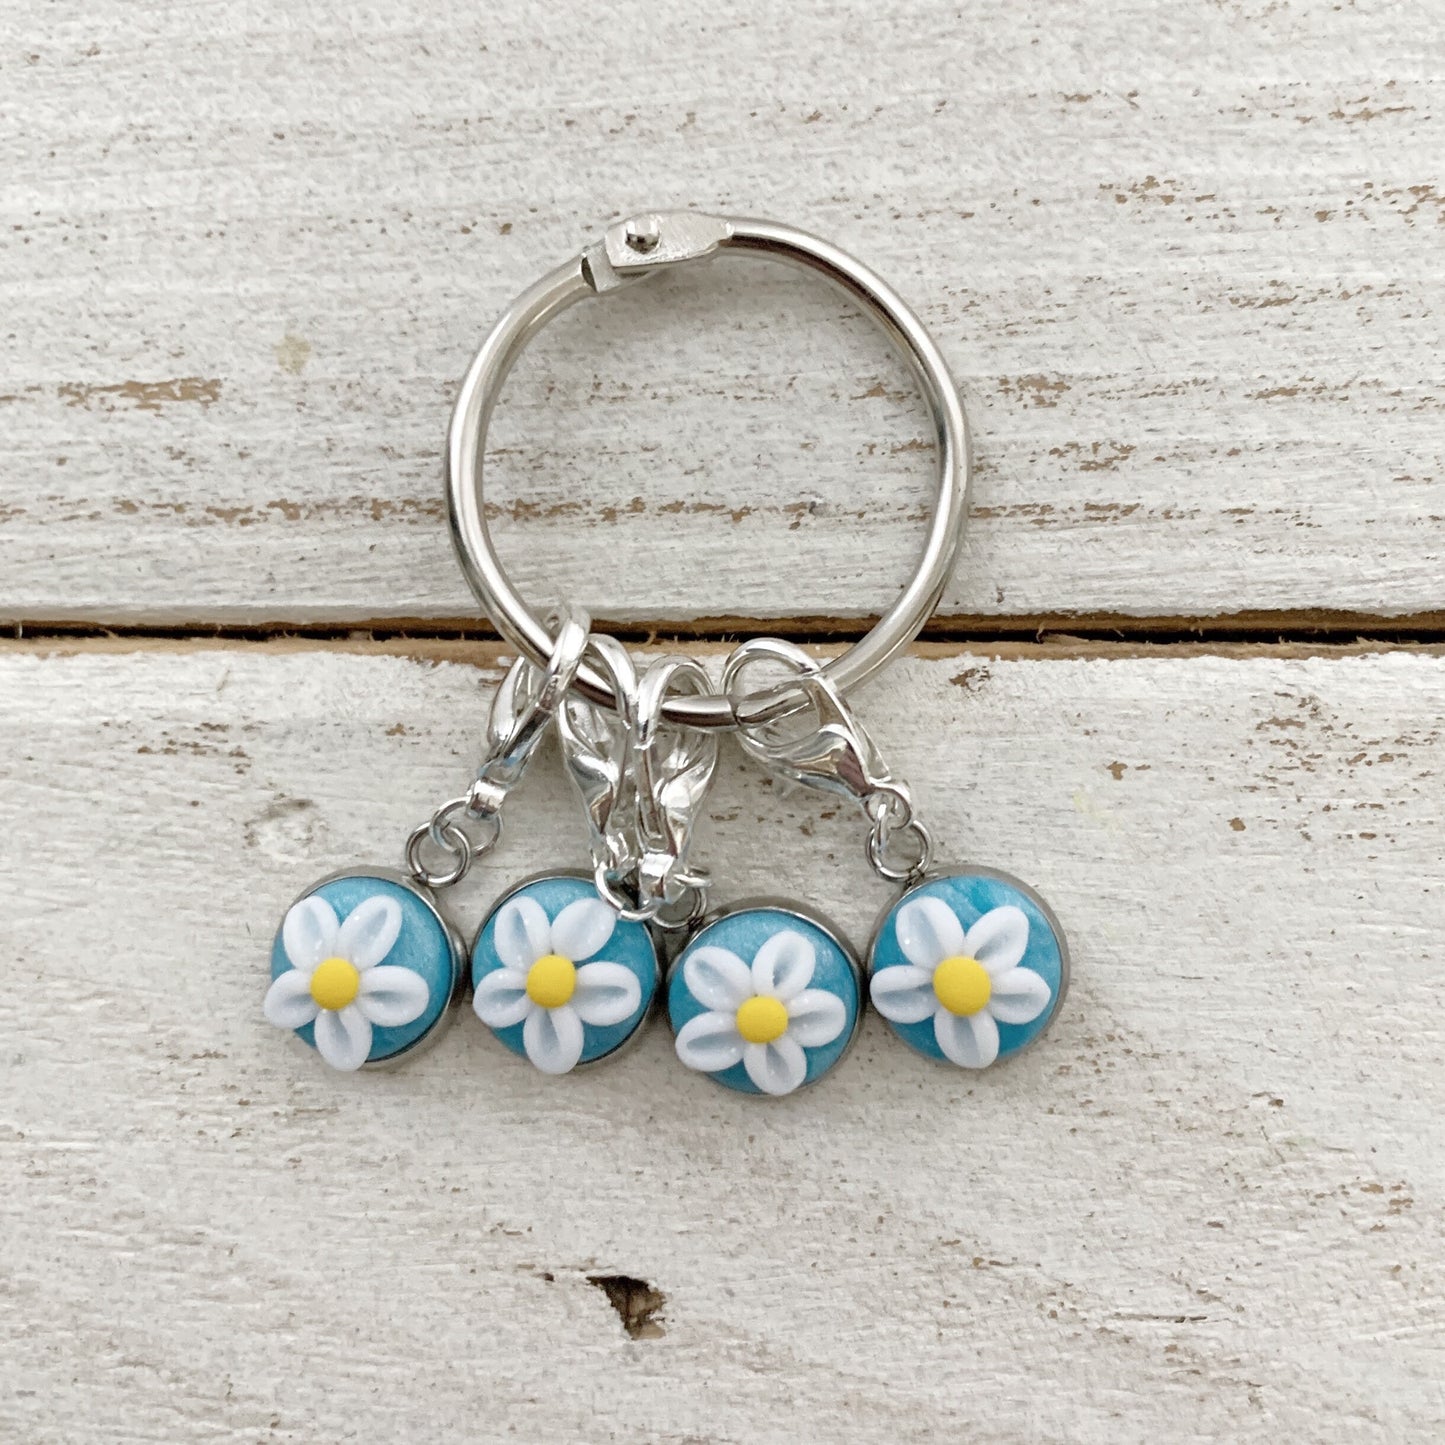 Daisy stitch markers, crochet progress keepers, gift for a crafter, polymer clay charms